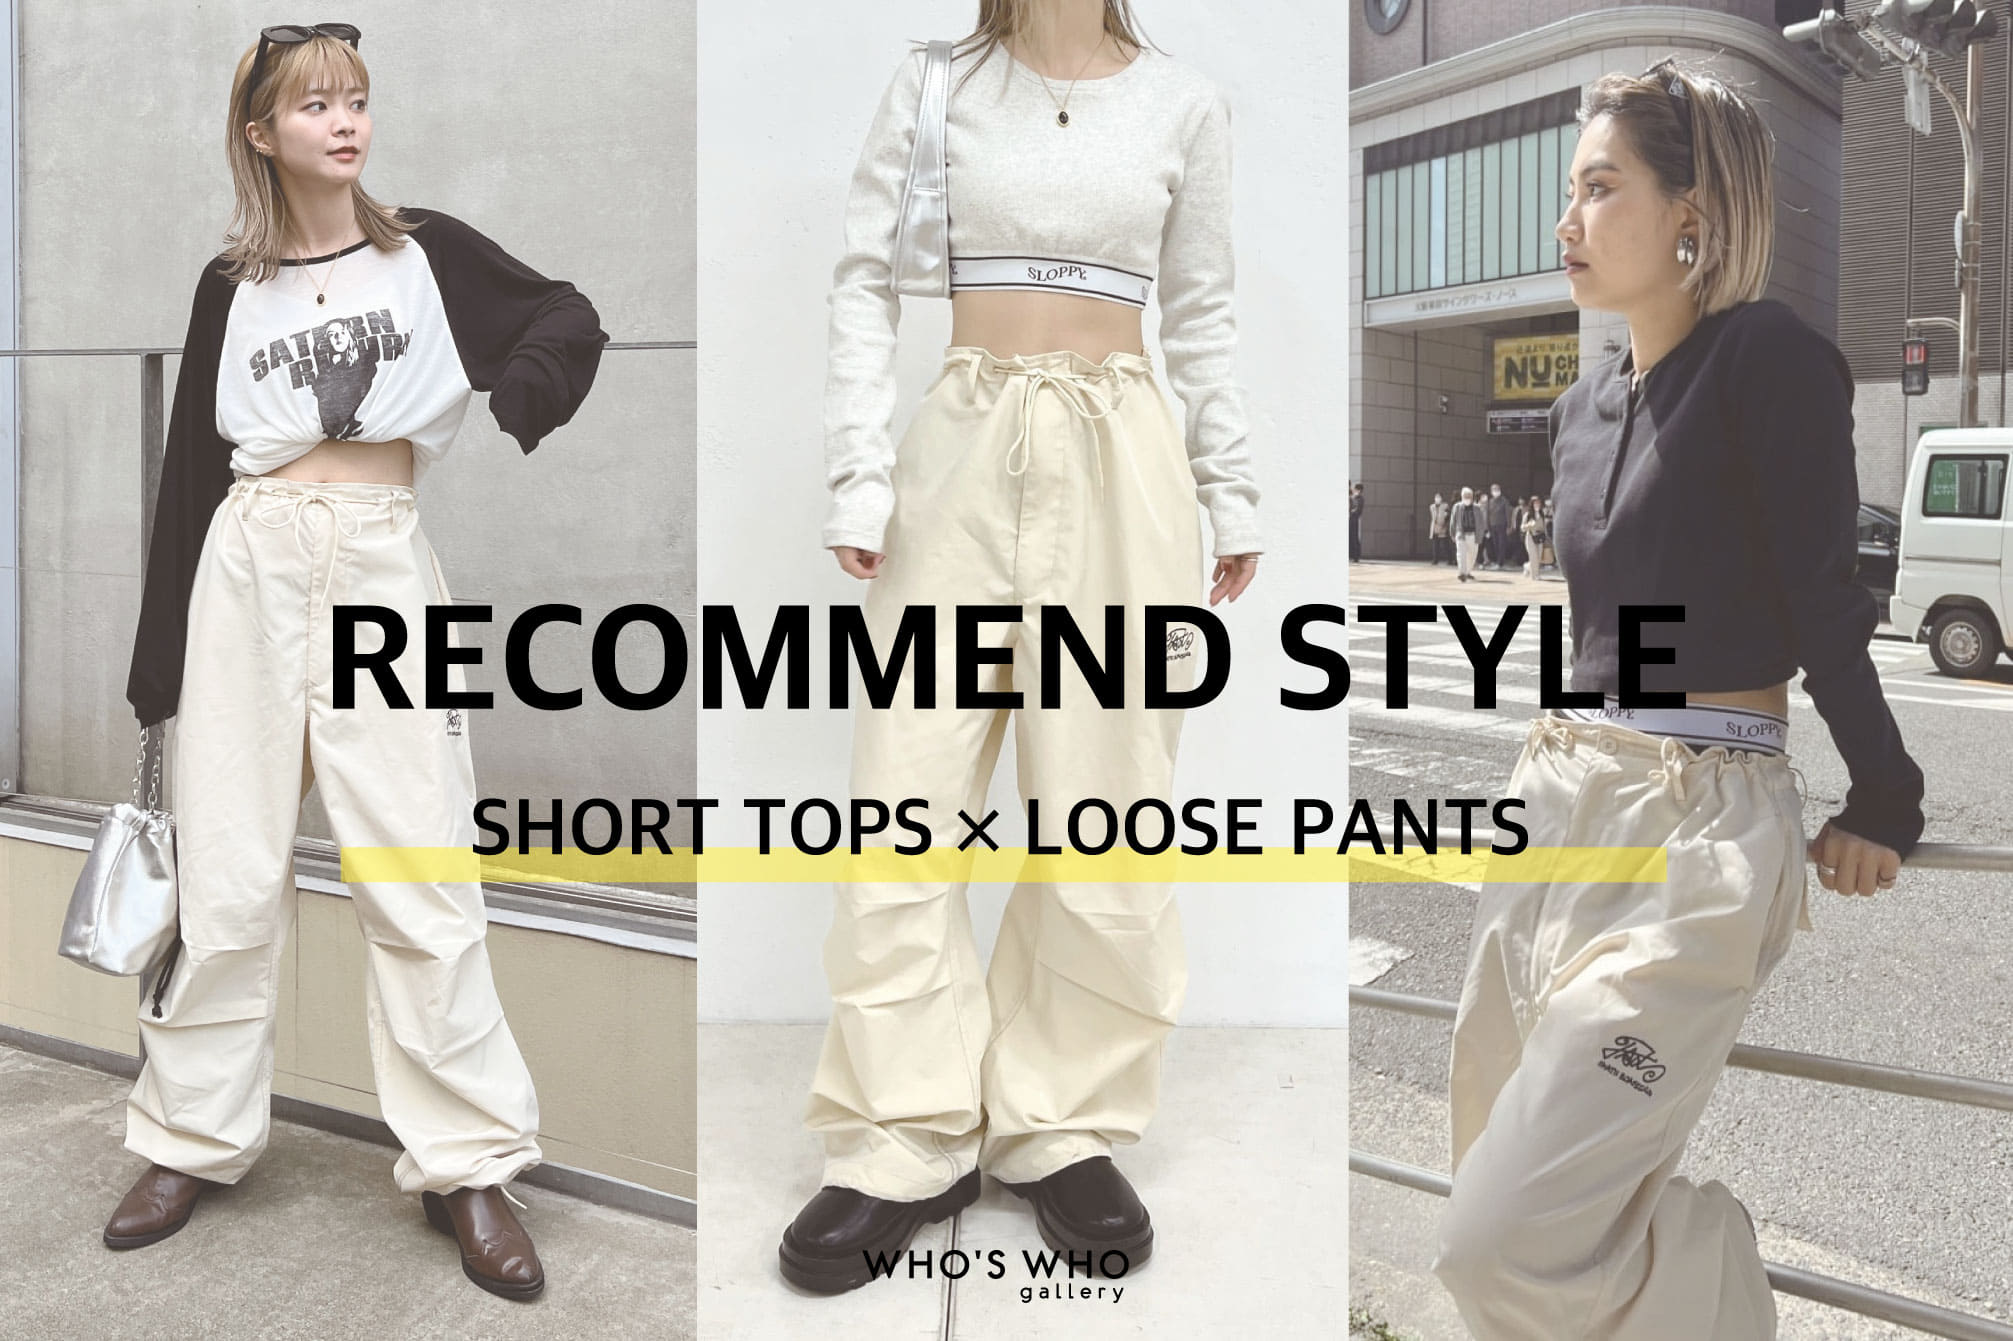 WHO’S WHO gallery 【RECOMMEND STYLE】